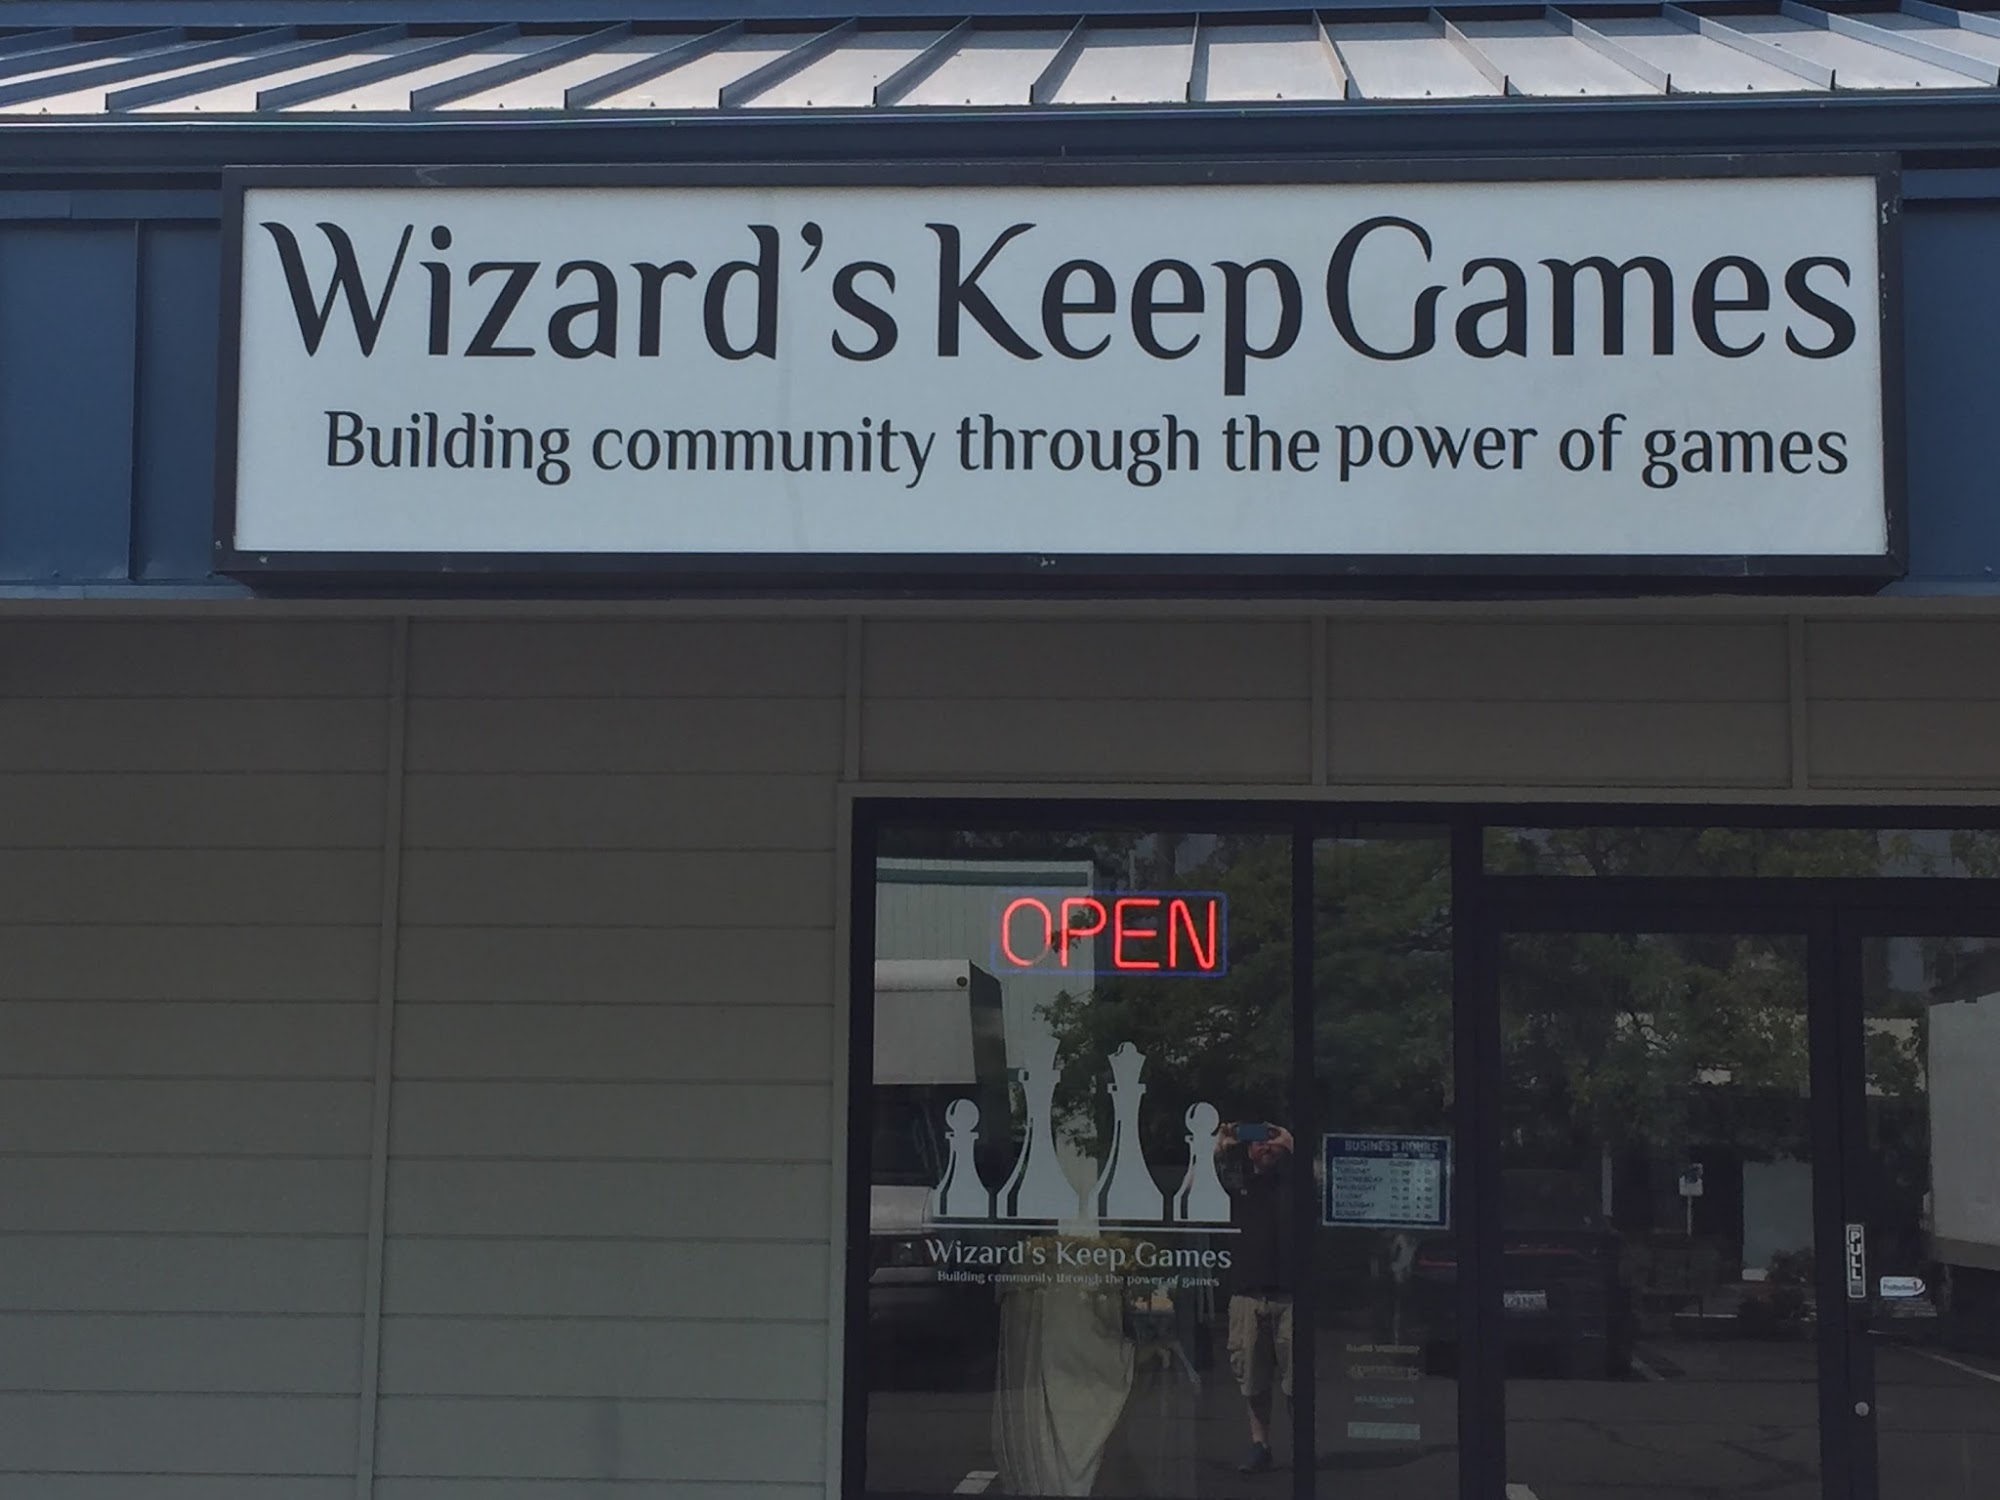 Wizards Keep Games